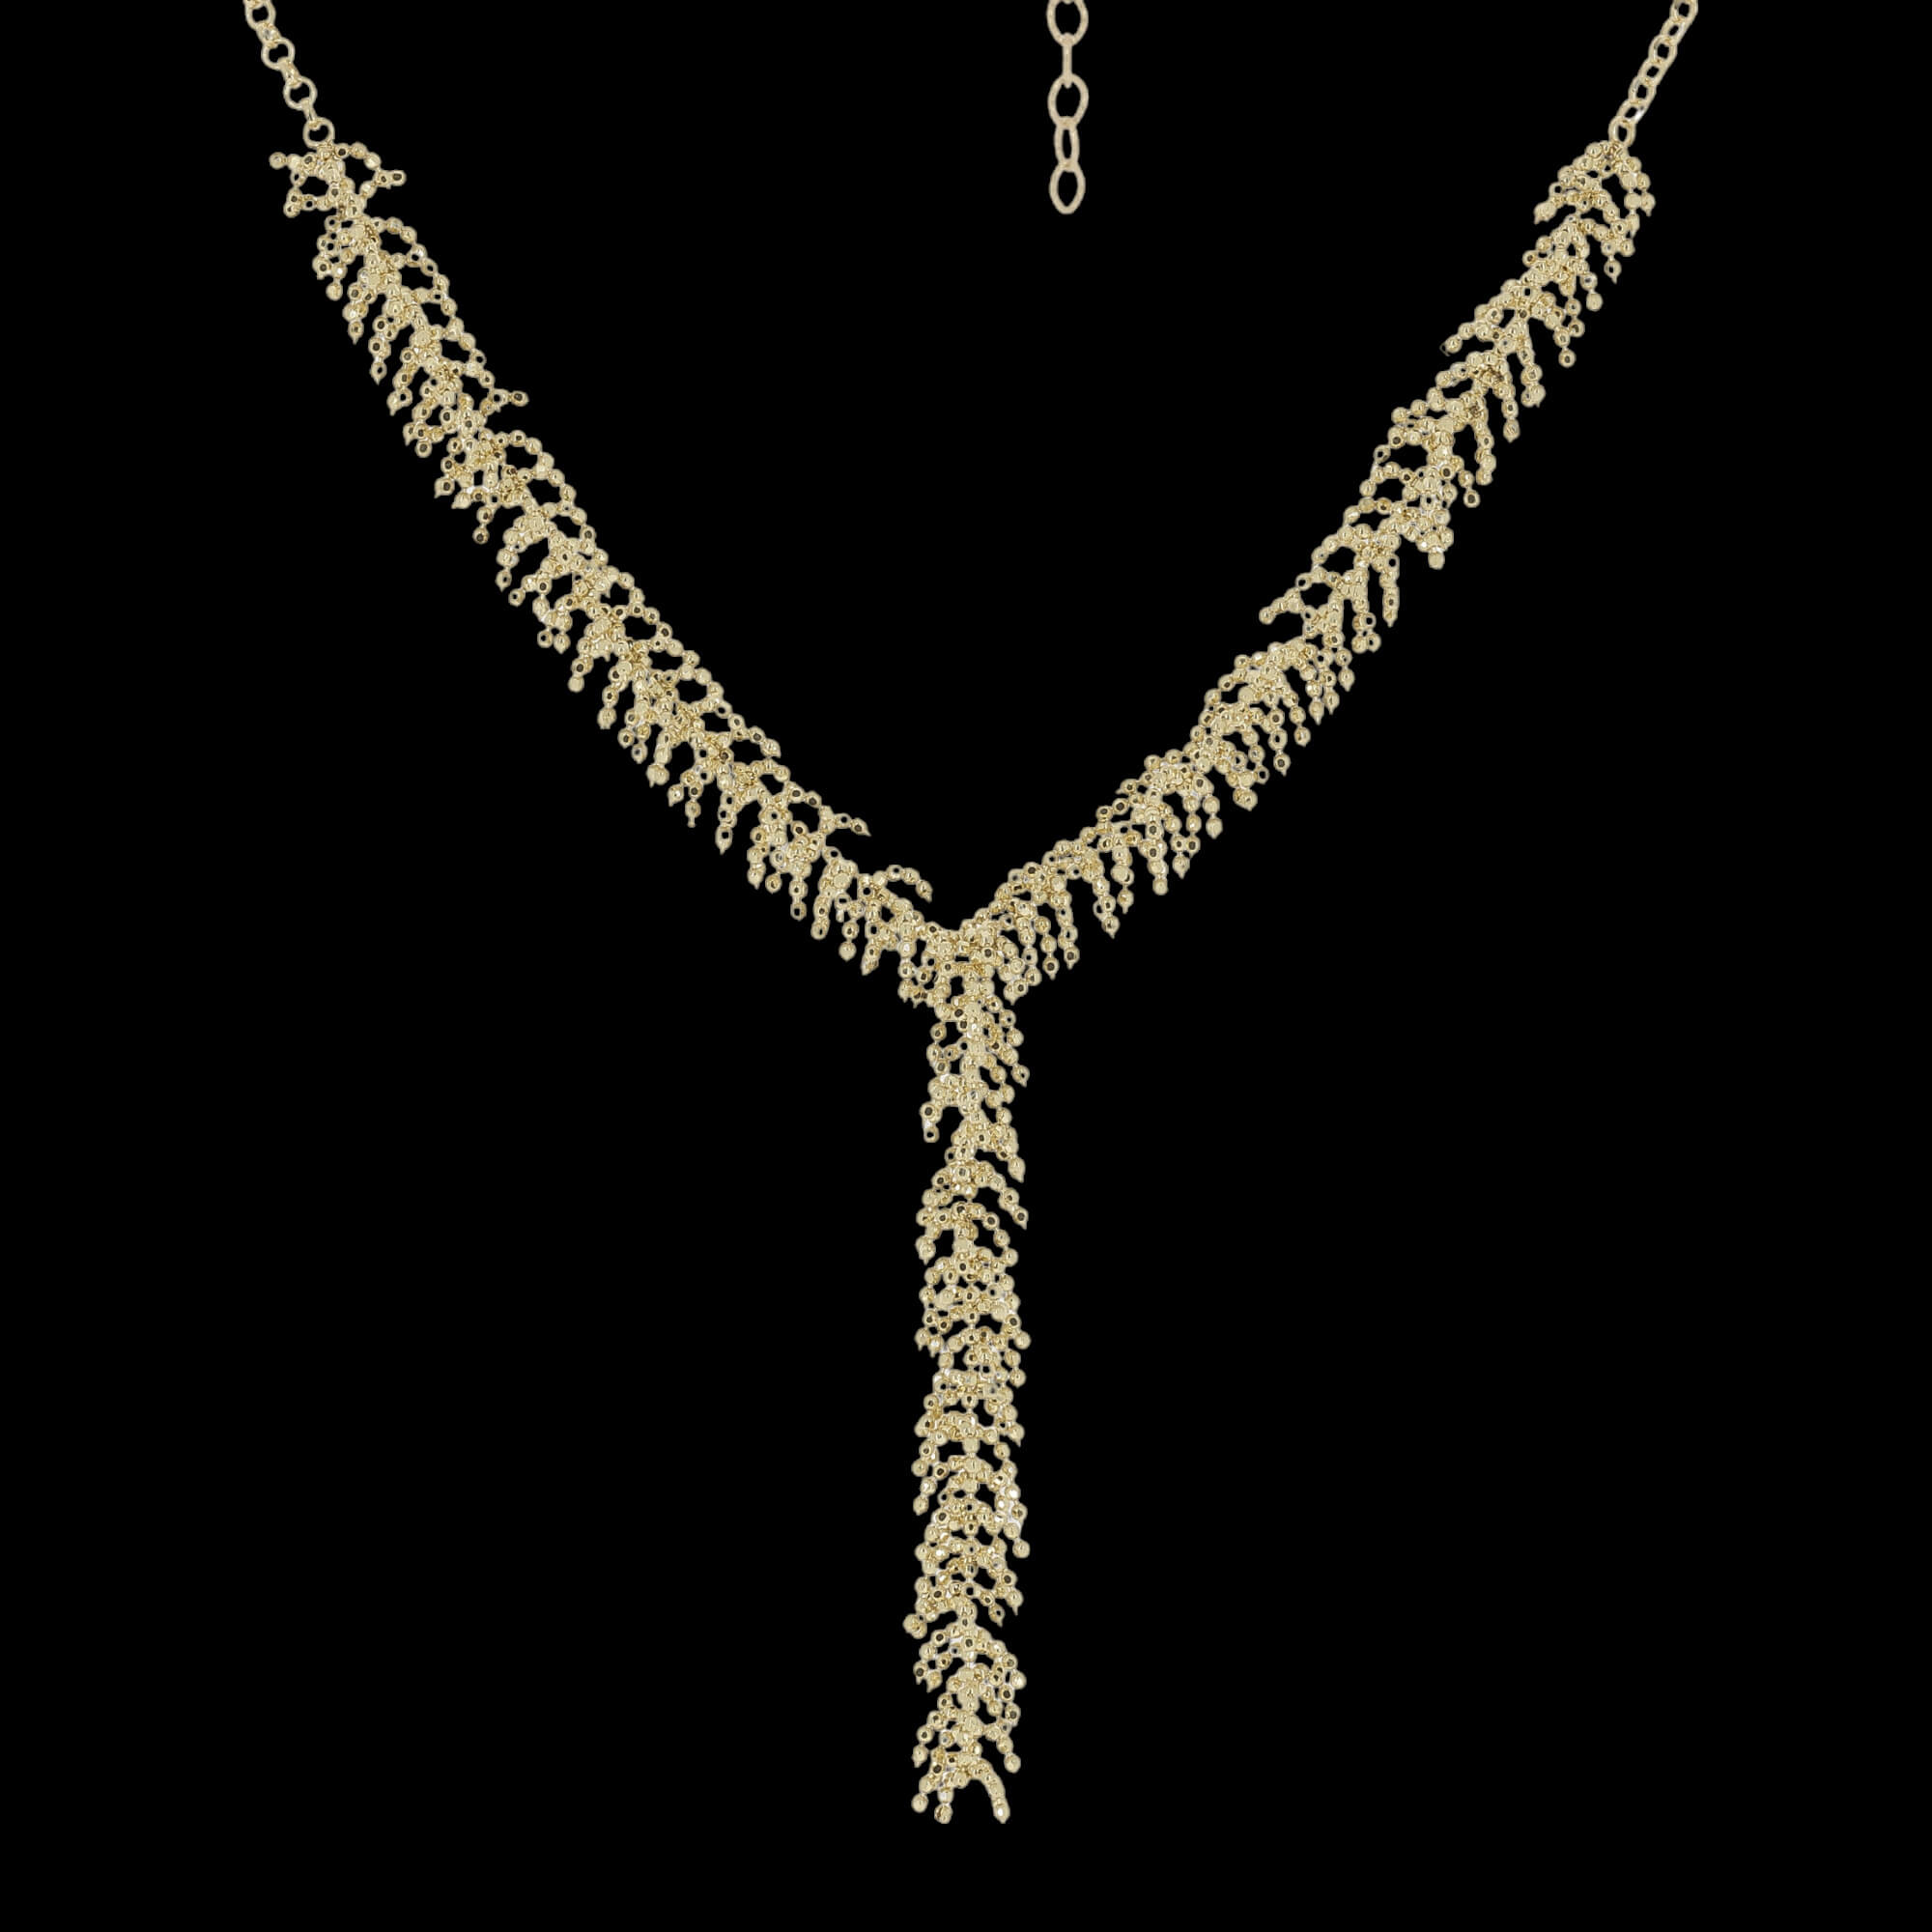 Chic necklace with refined branches of 18kt gold